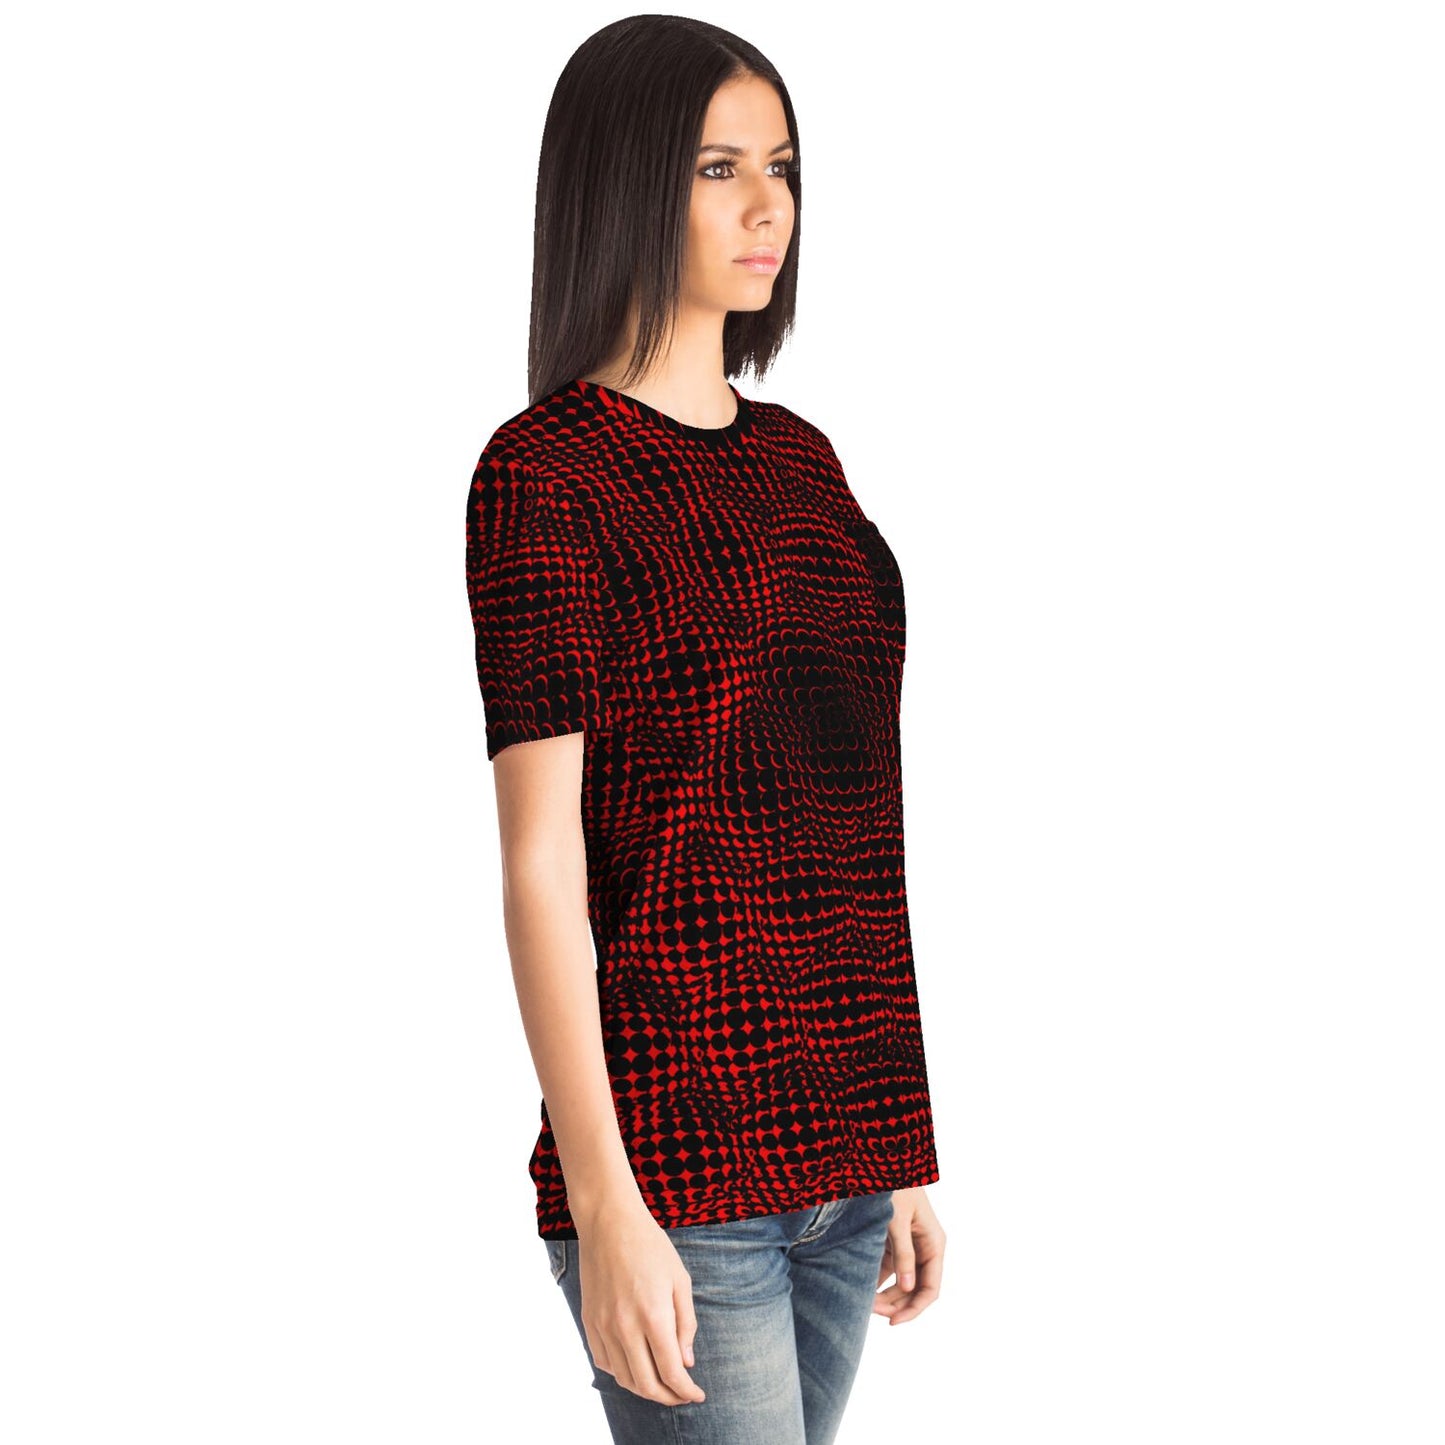 EYS - Dotted Sphere Pattern Black and Red Color Shirt